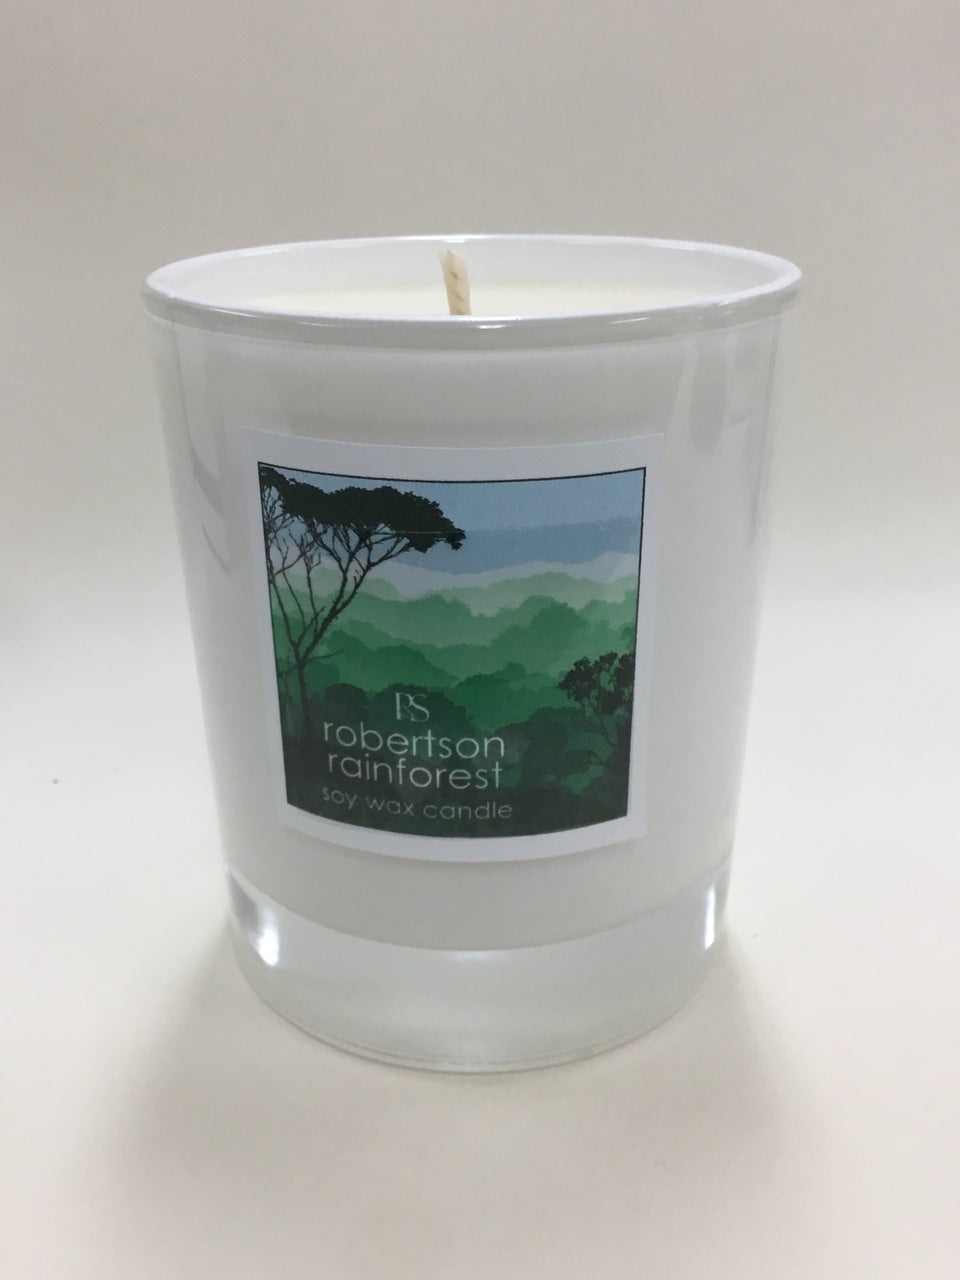 Robertson Rainforest ... Soy Wax Candle